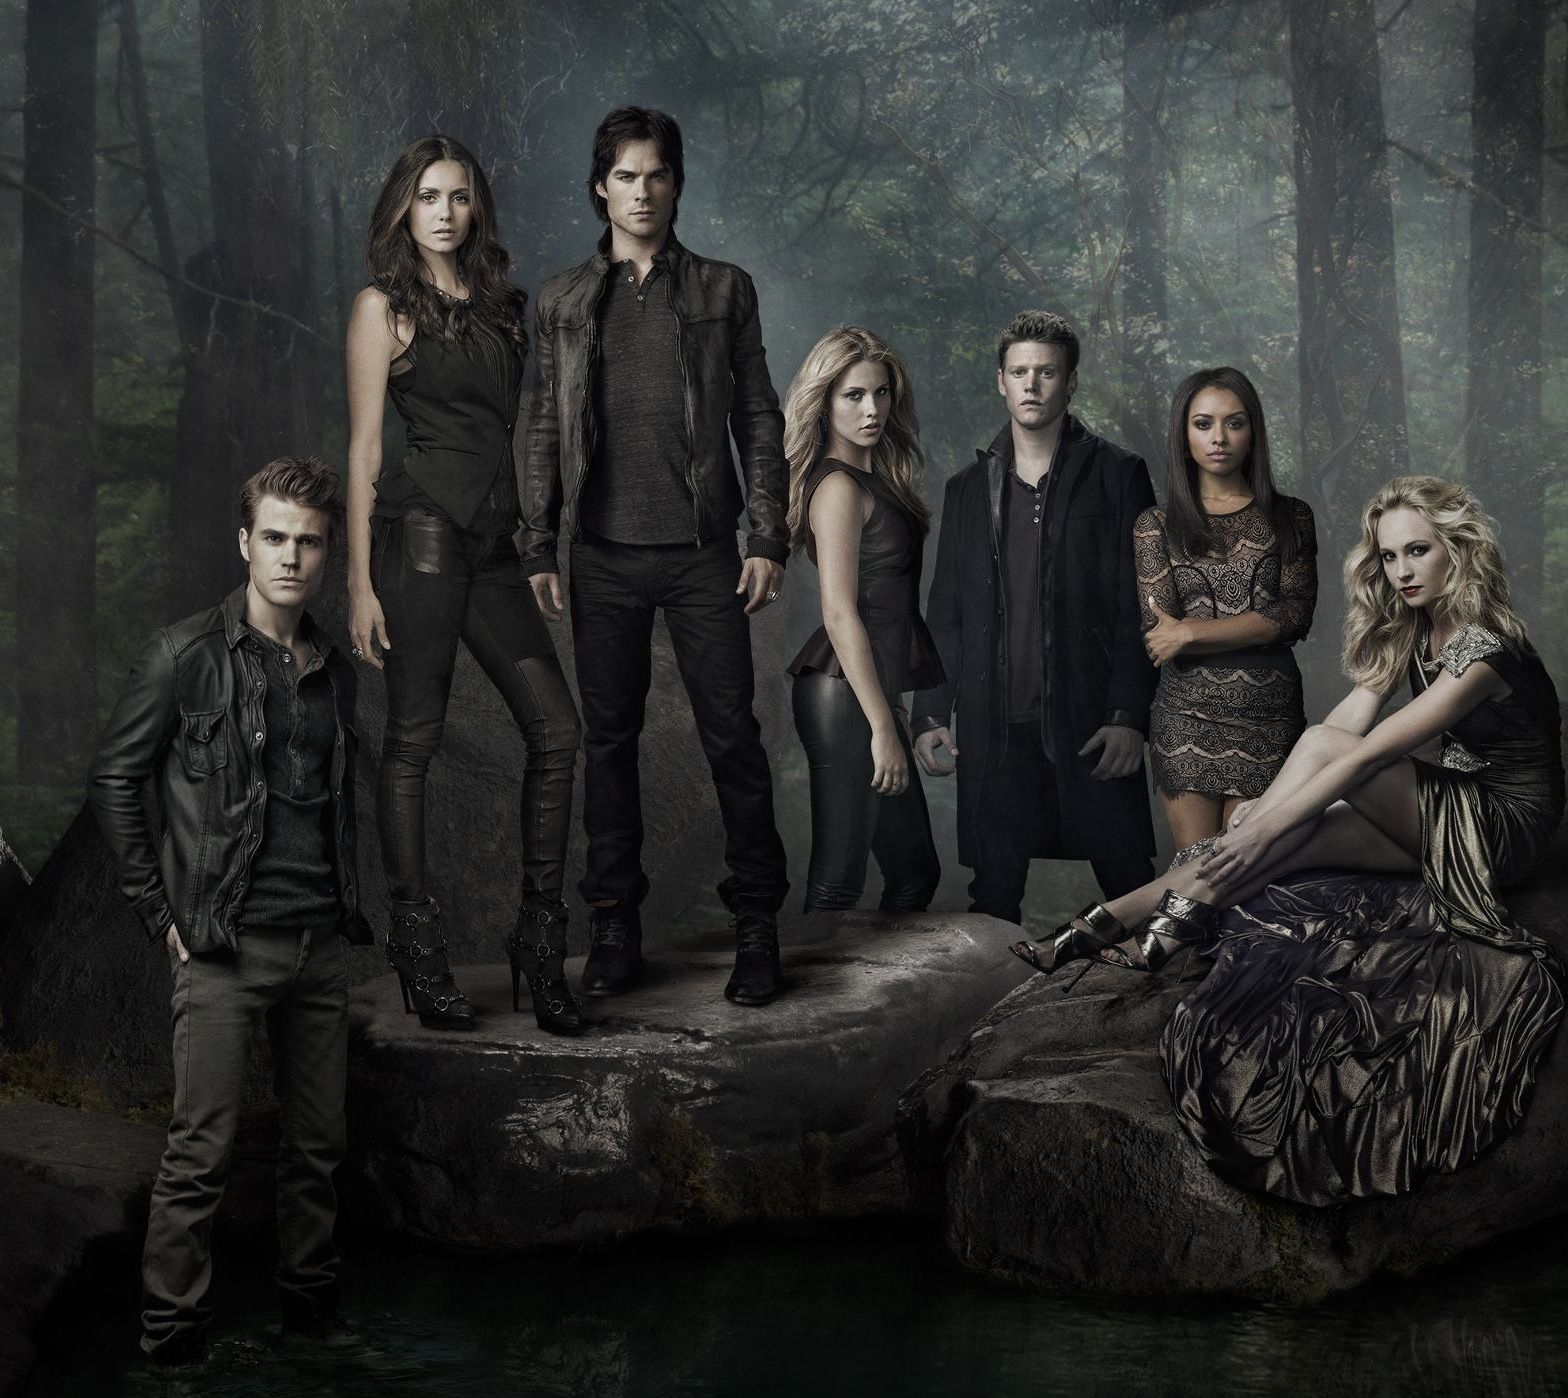 vampire diaries whole cast names